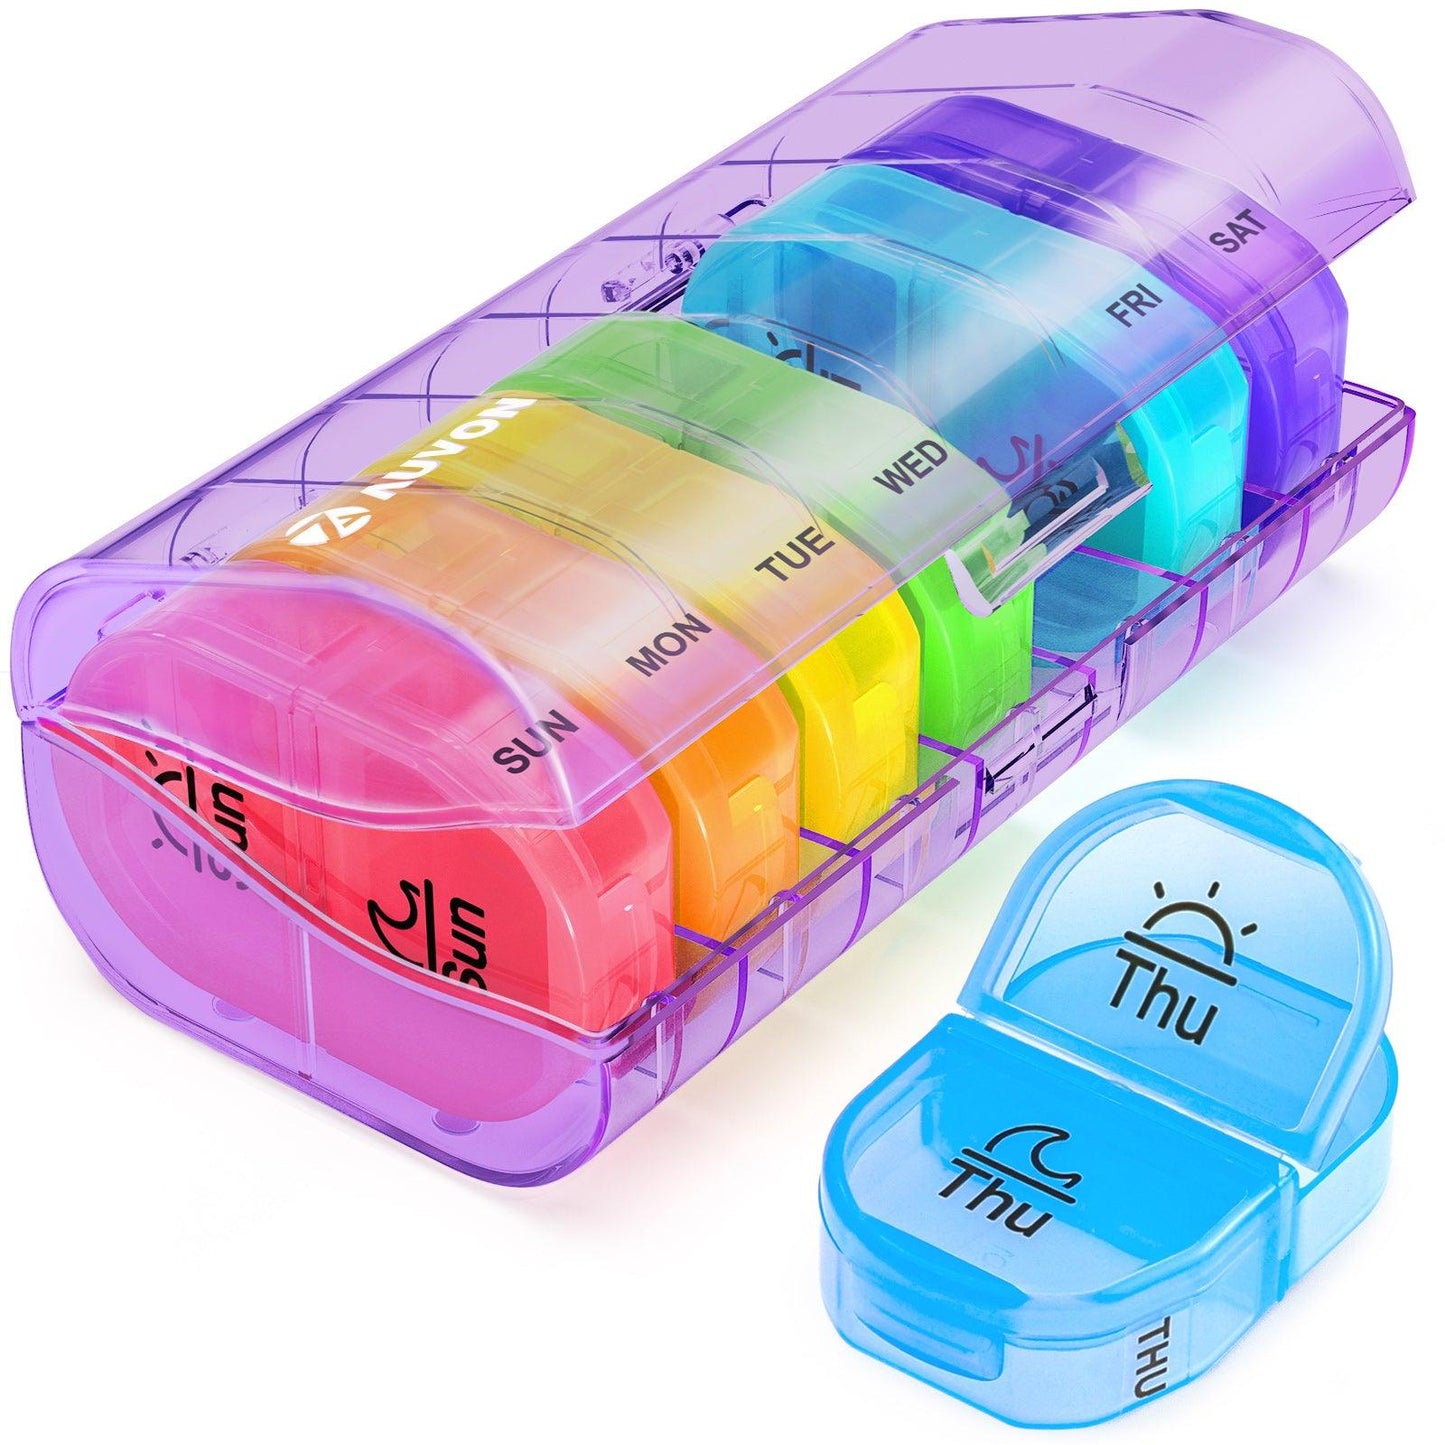 AUVON Pill Box 2 Times a Day, Weekly Pill Organizer AM PM with 7 Daily Pocket Case to Hold Vitamin, Medicine, Medication, and Supplement - AUVON